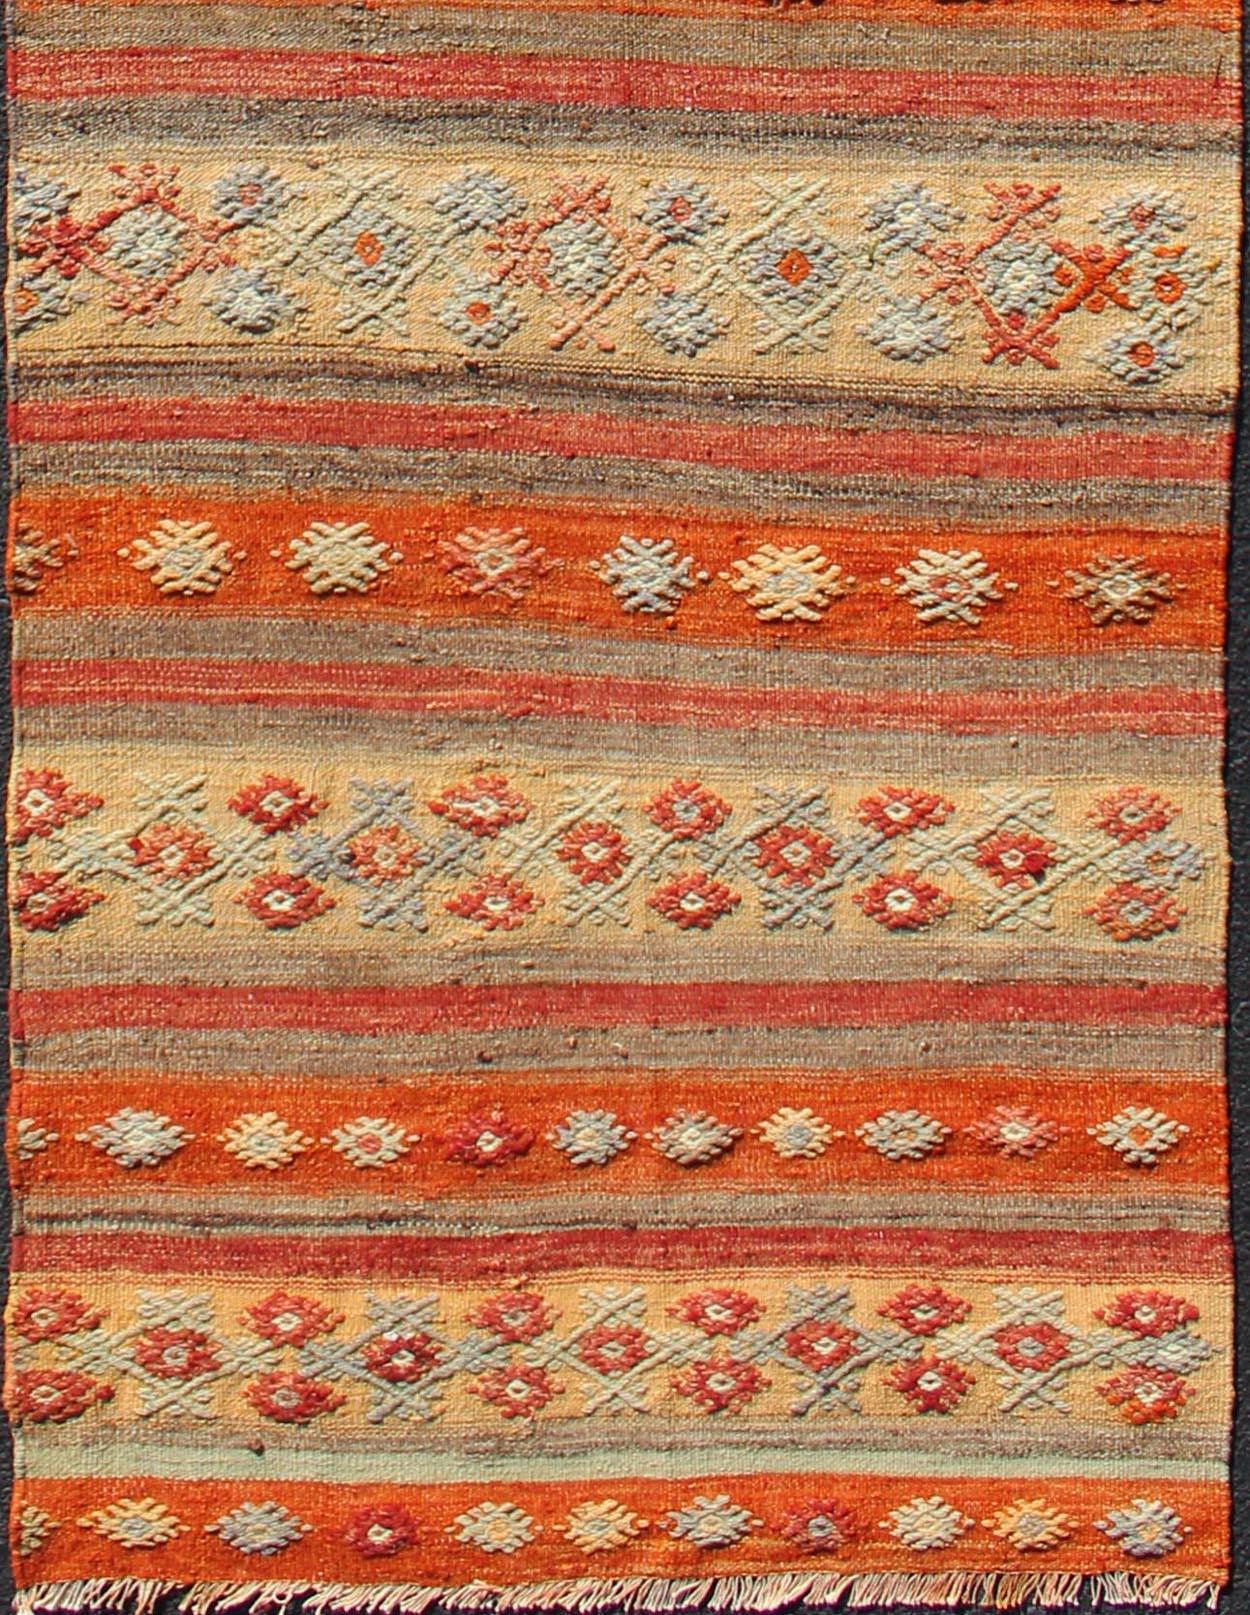 Hand-Woven Colorful Vintage Turkish Kilim Runner with Stripes and Geometric Embroideries For Sale